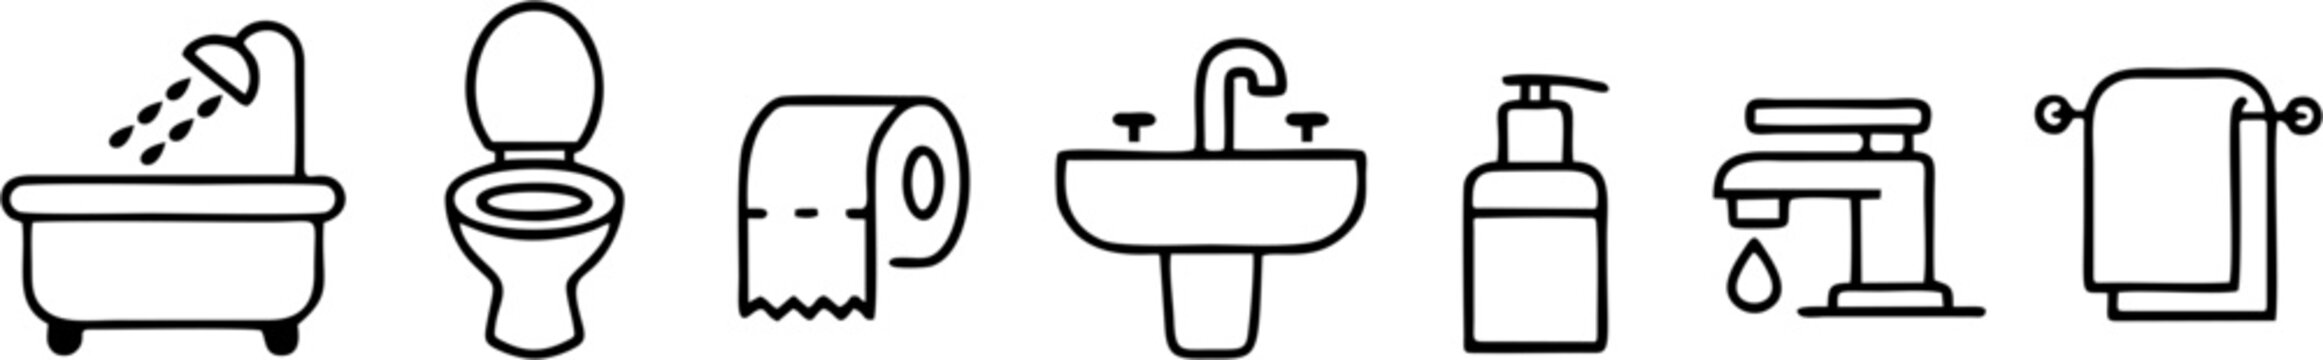 Bathroom toilet and sink - thin line icon collection on white background